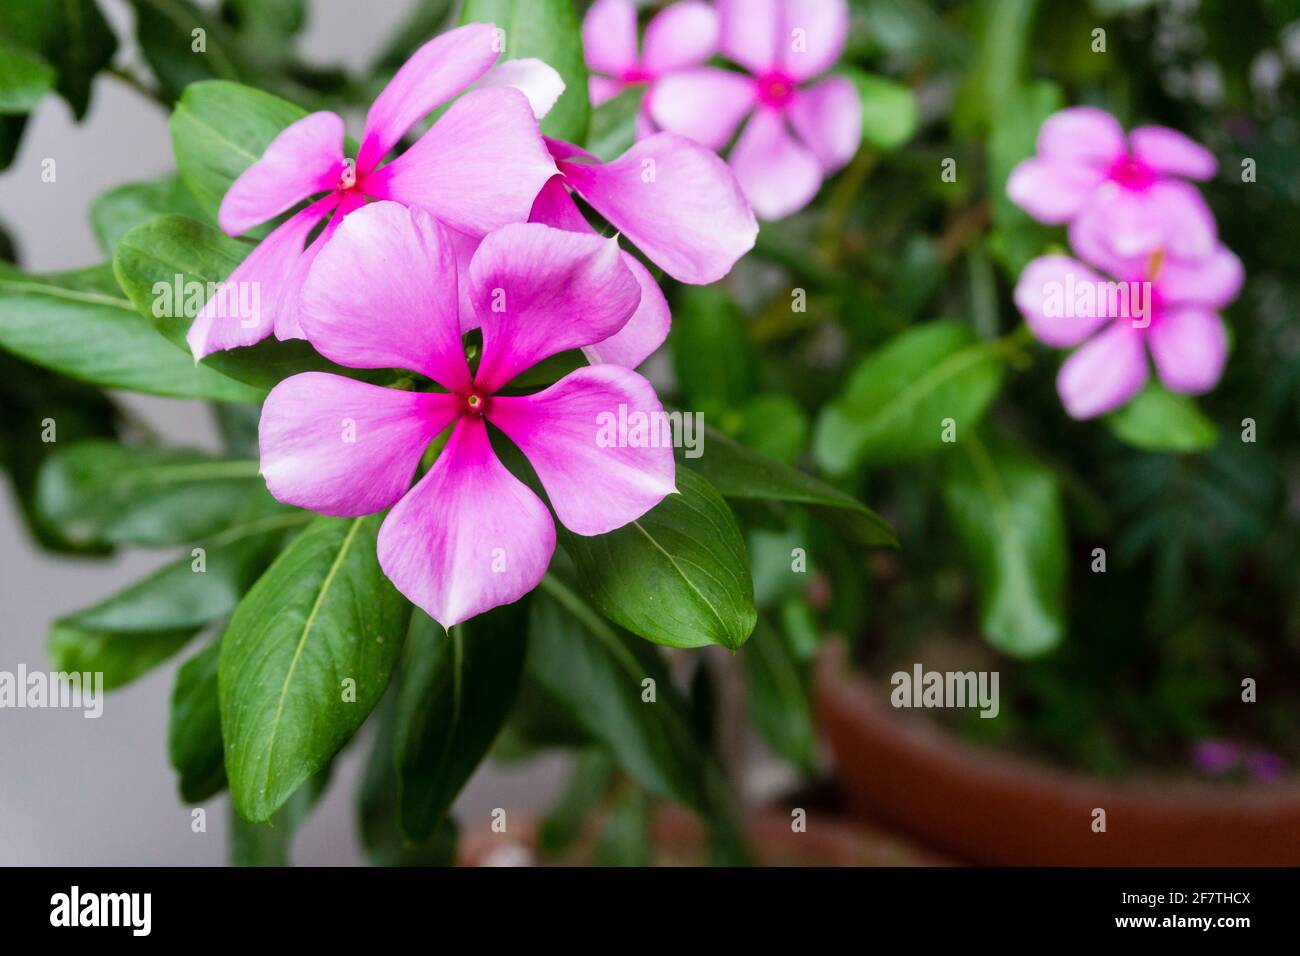 Madagascar Periwinkle, Catharanthus roseus, commonly known as bright eyes,is a species of flowering plant in the family Apocynaceae. Stock Photo